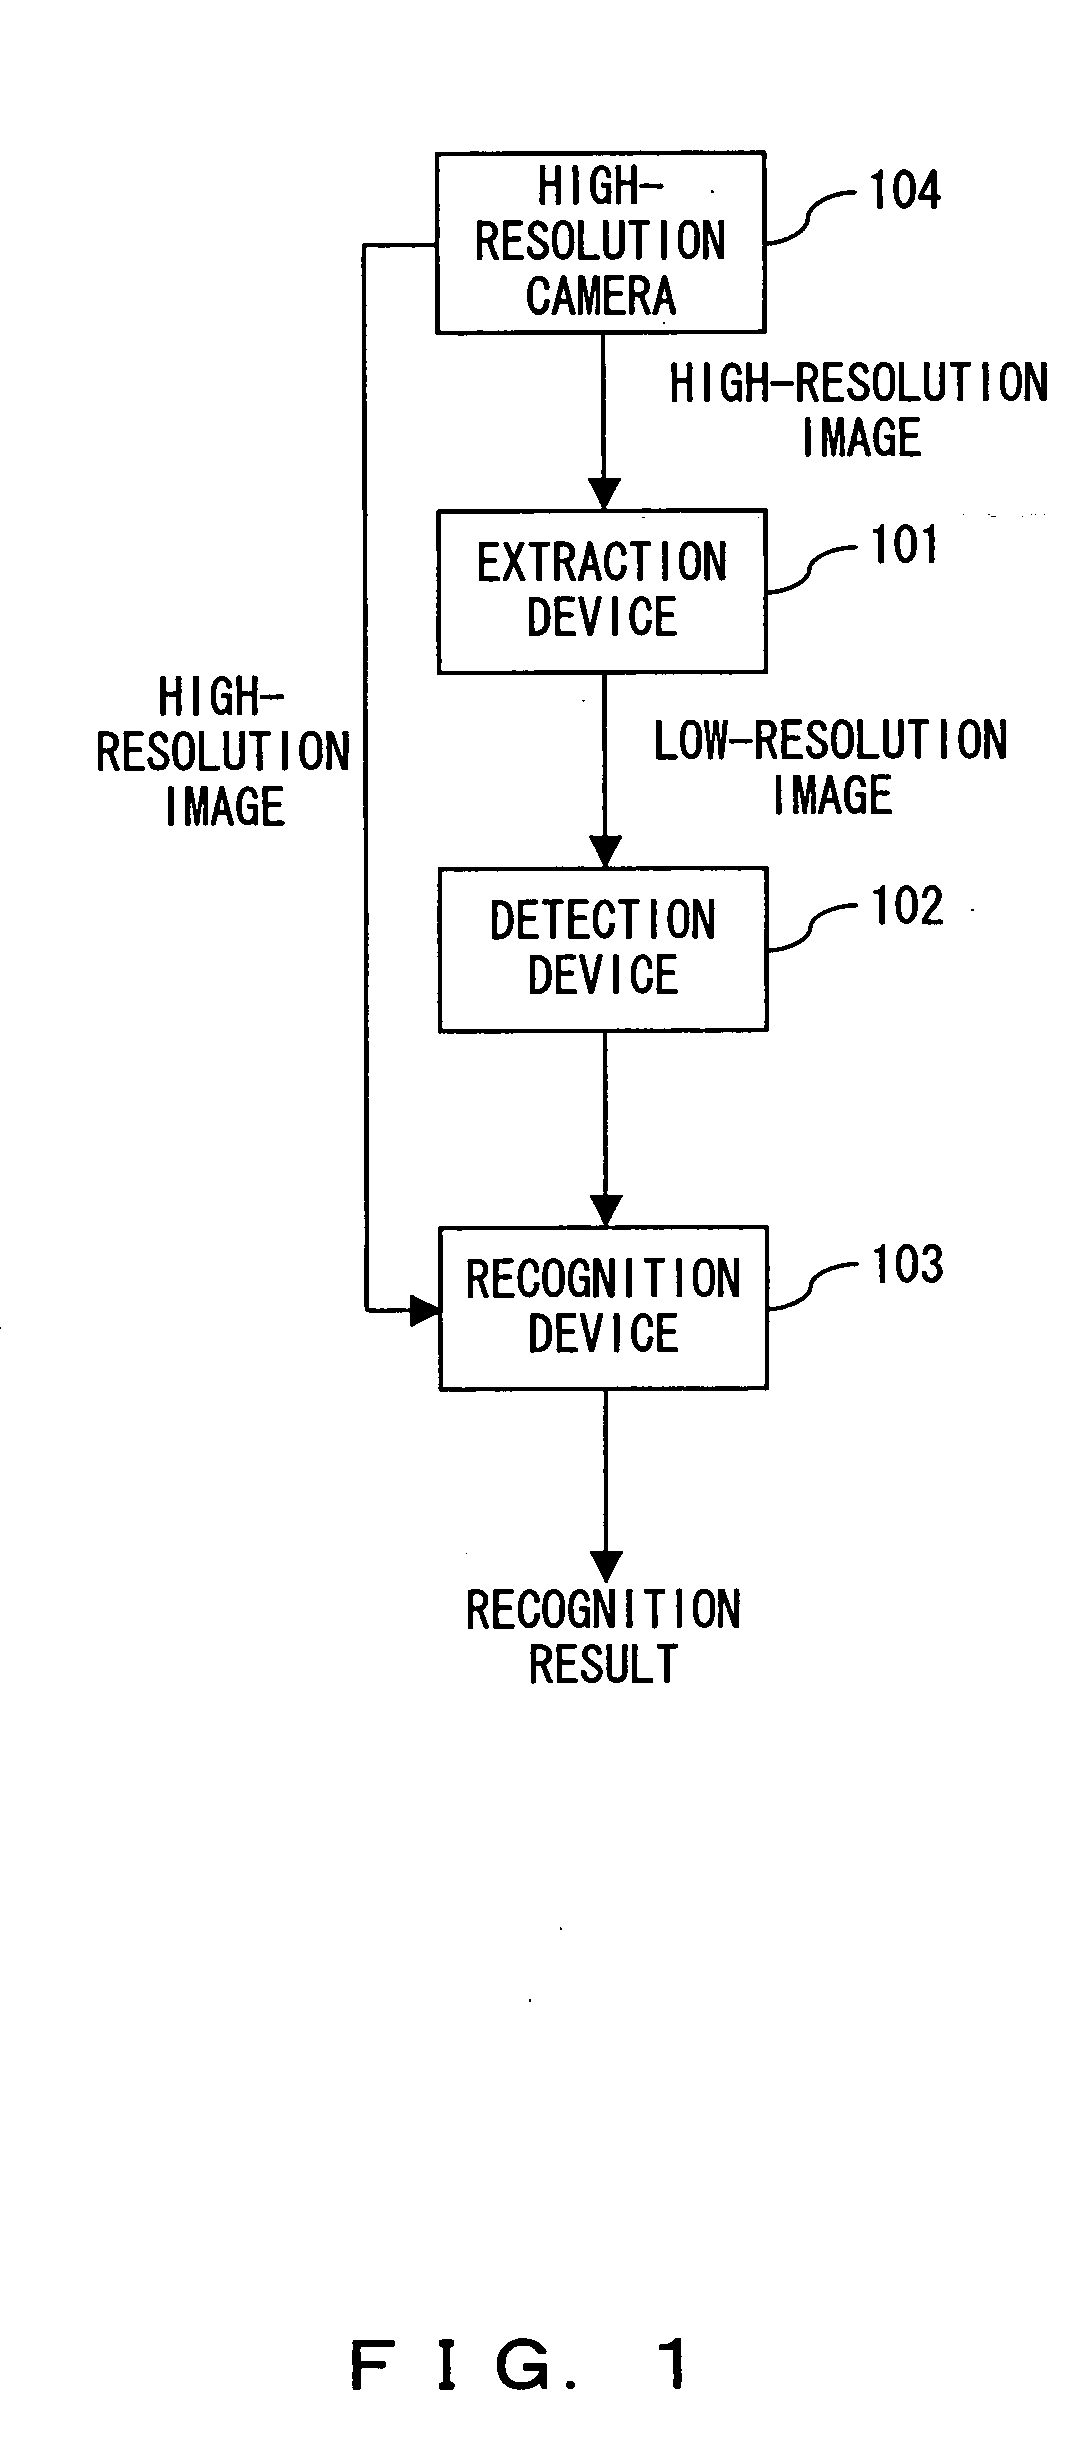 Image processing apparatus for detecting and recognizing mobile object